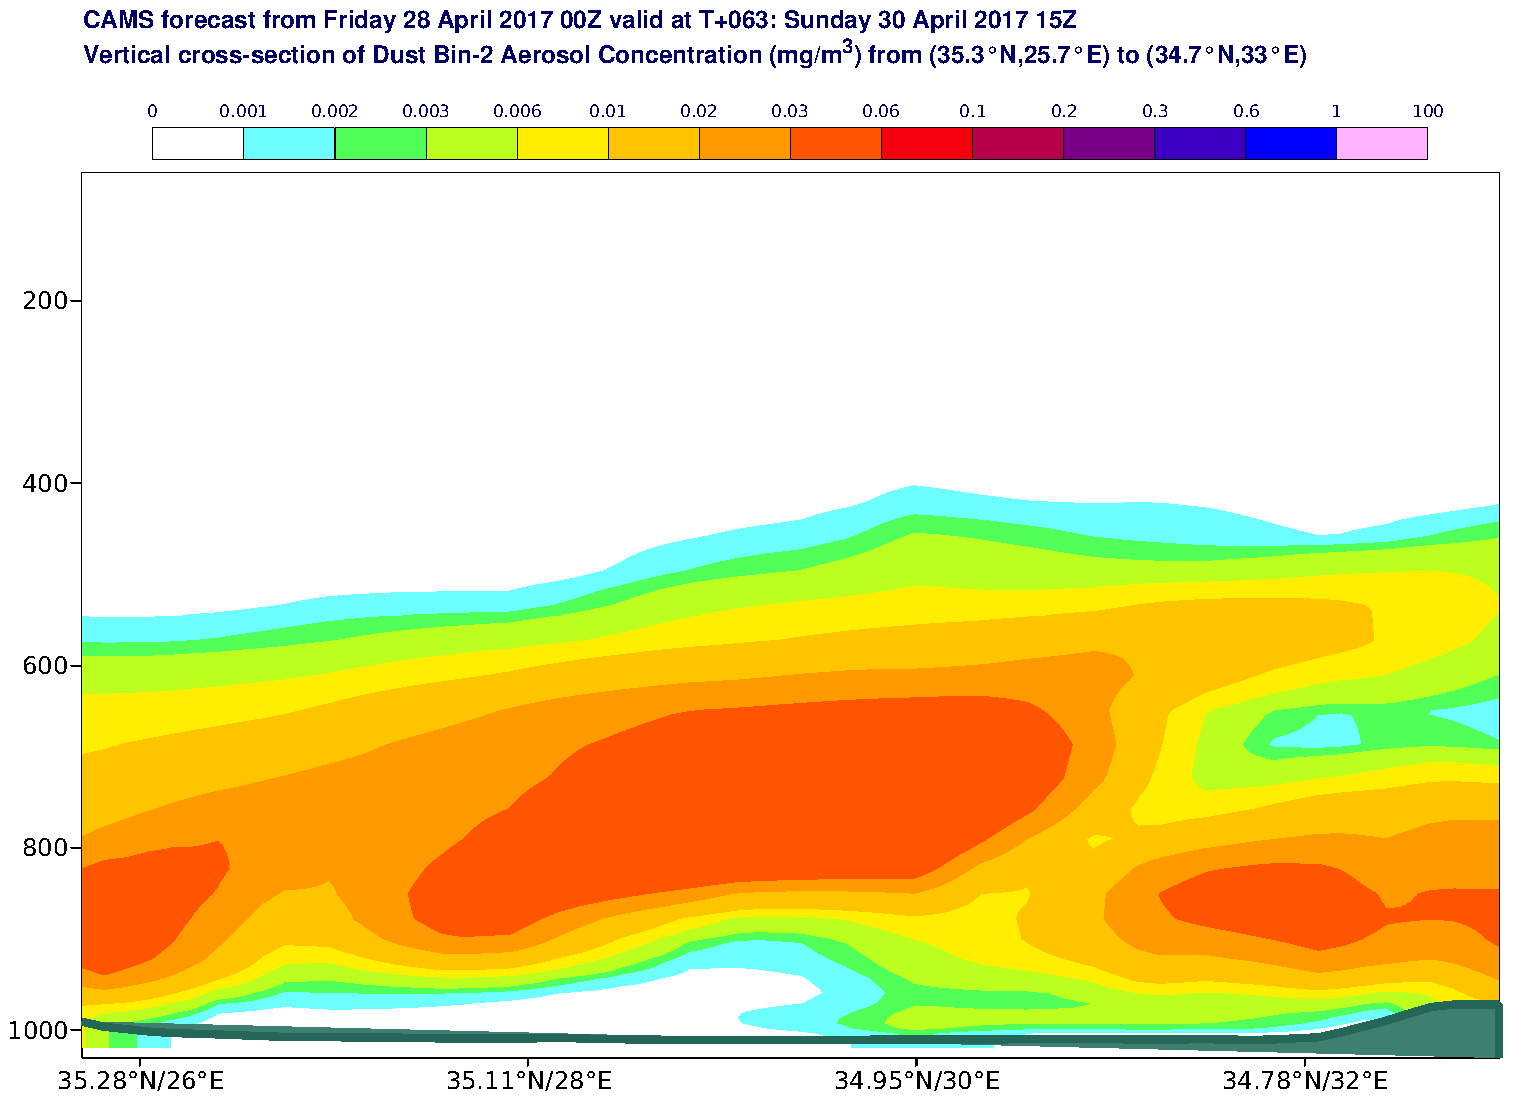 Vertical cross-section of Dust Bin-2 Aerosol Concentration (mg/m3) valid at T63 - 2017-04-30 15:00